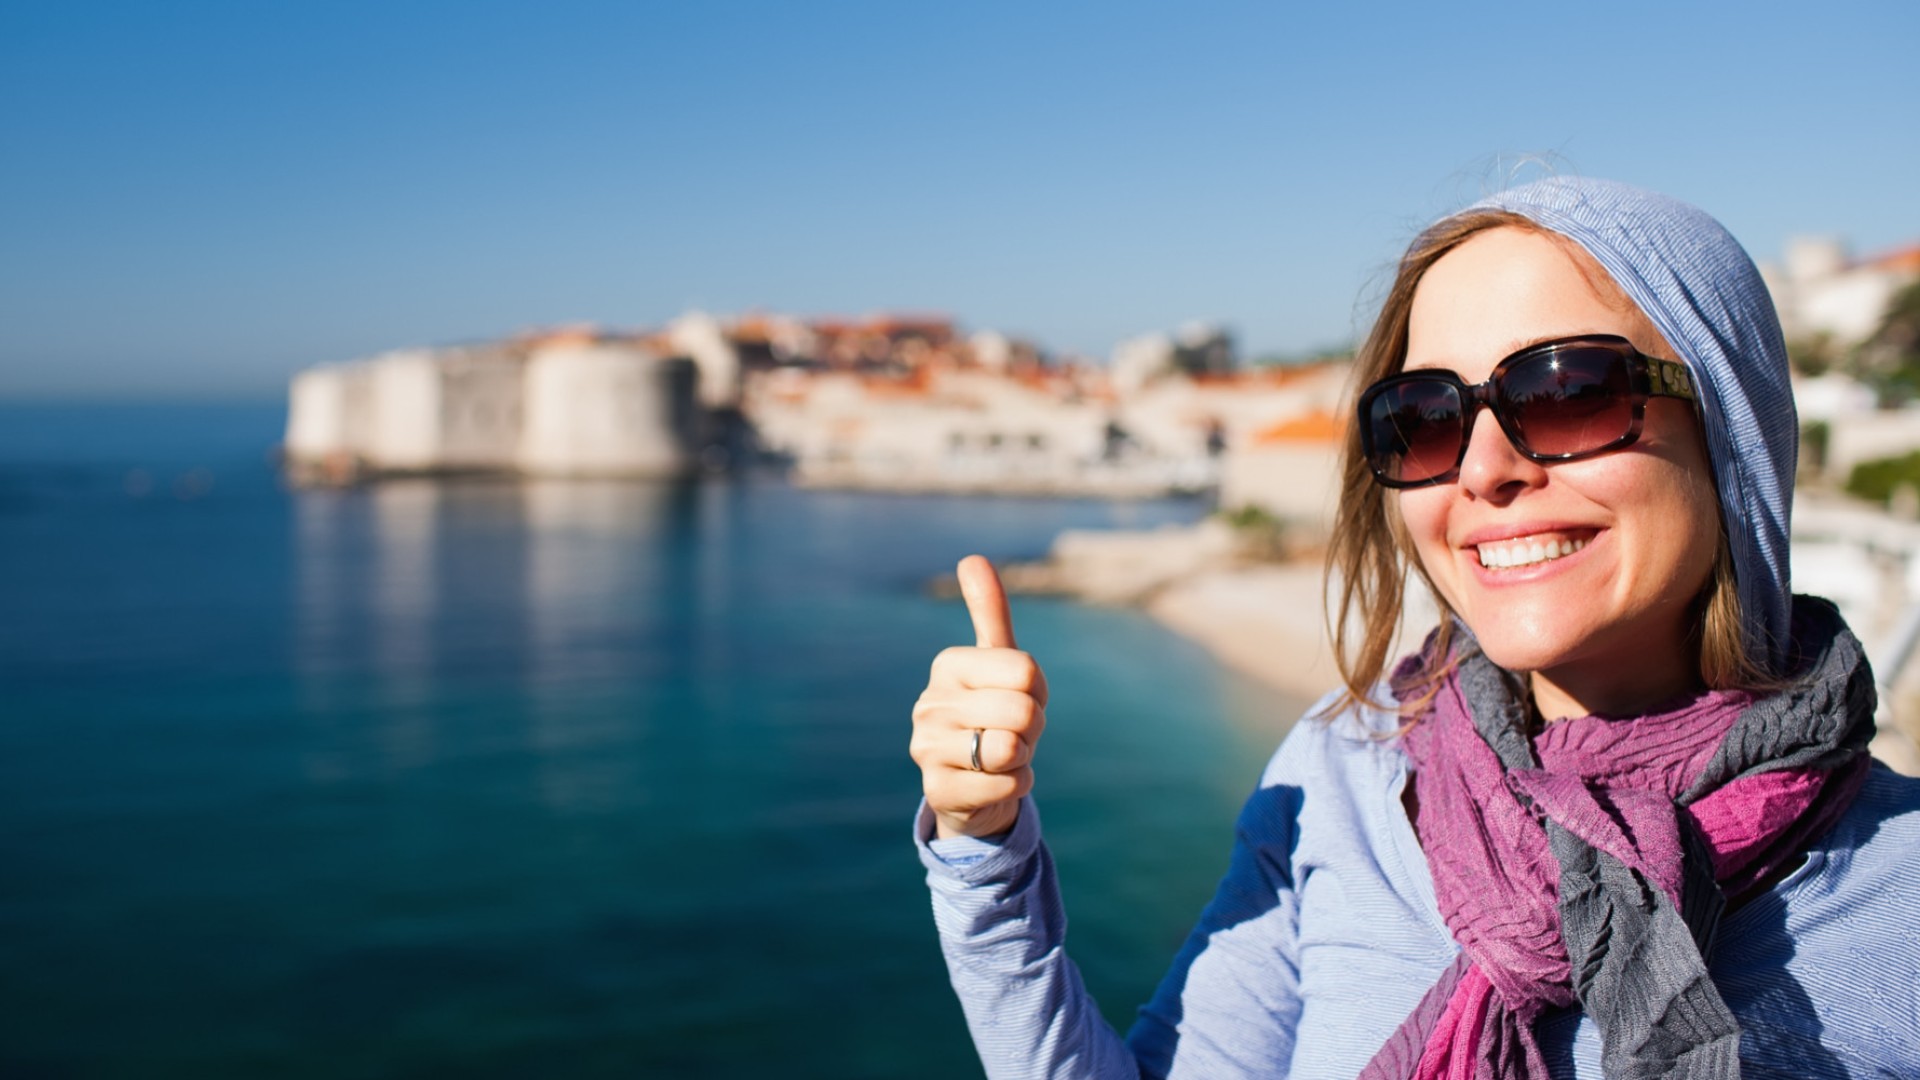 A woman wearing sunglasses smiling in the right third of the image in front of Adriatic Sea in Croatia